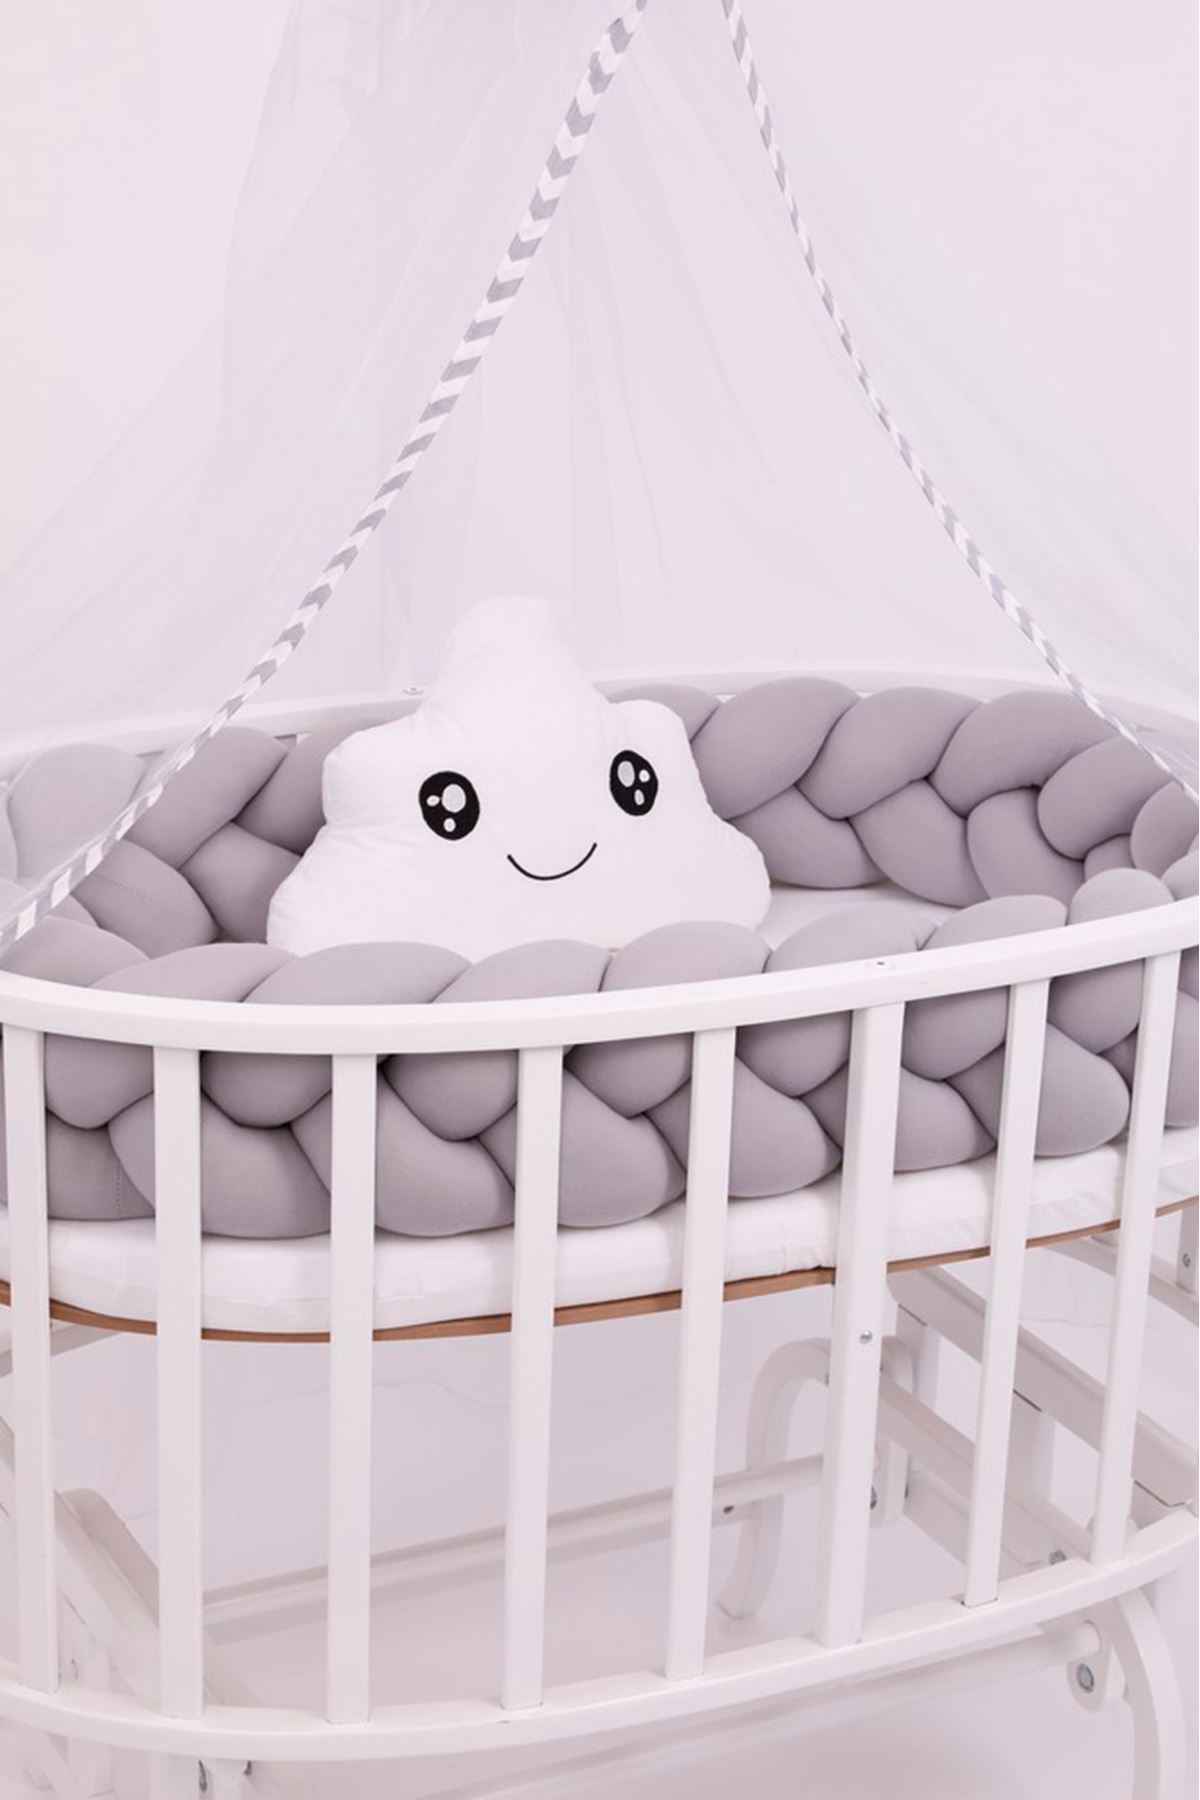 Knit Protection for Crib "Gray"